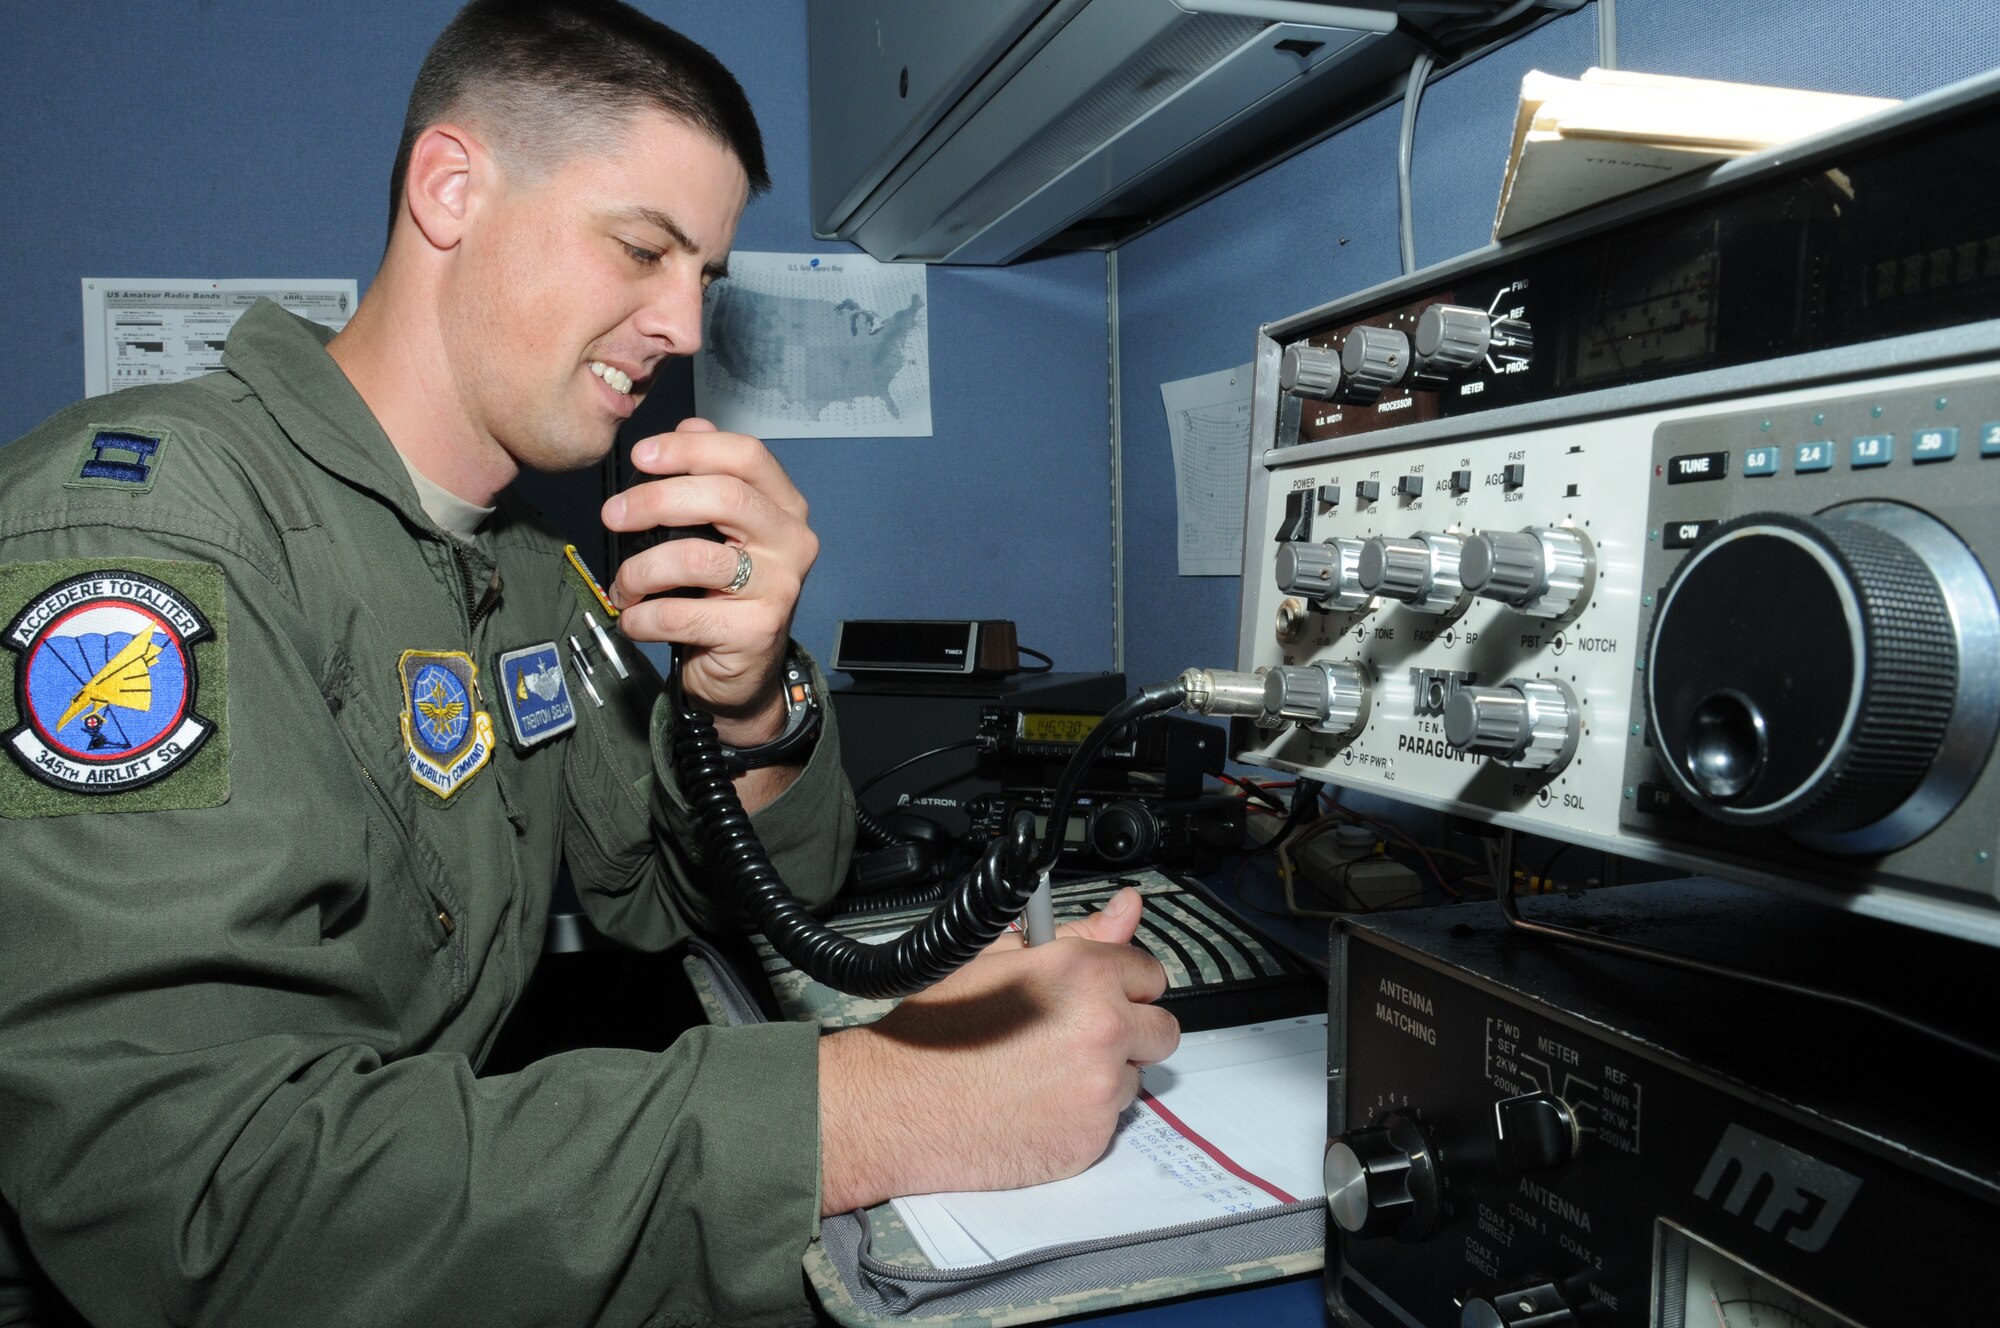 Capt. Trenton Selah, 345th Airlift Squadron, attempts to communicate using a ten-tec high frequency transceiver while logging his efforts at the Locker House, Keesler Air Force Base, Miss., Nov. 7, 2011.  Selah is a member of the Keesler Amateur Radio Club that meets 7 p.m. the second Monday of the month in Rooms 5438 and 5439, Locker House, KAFB.  (U.S. Air Force photo by Kemberly Groue)